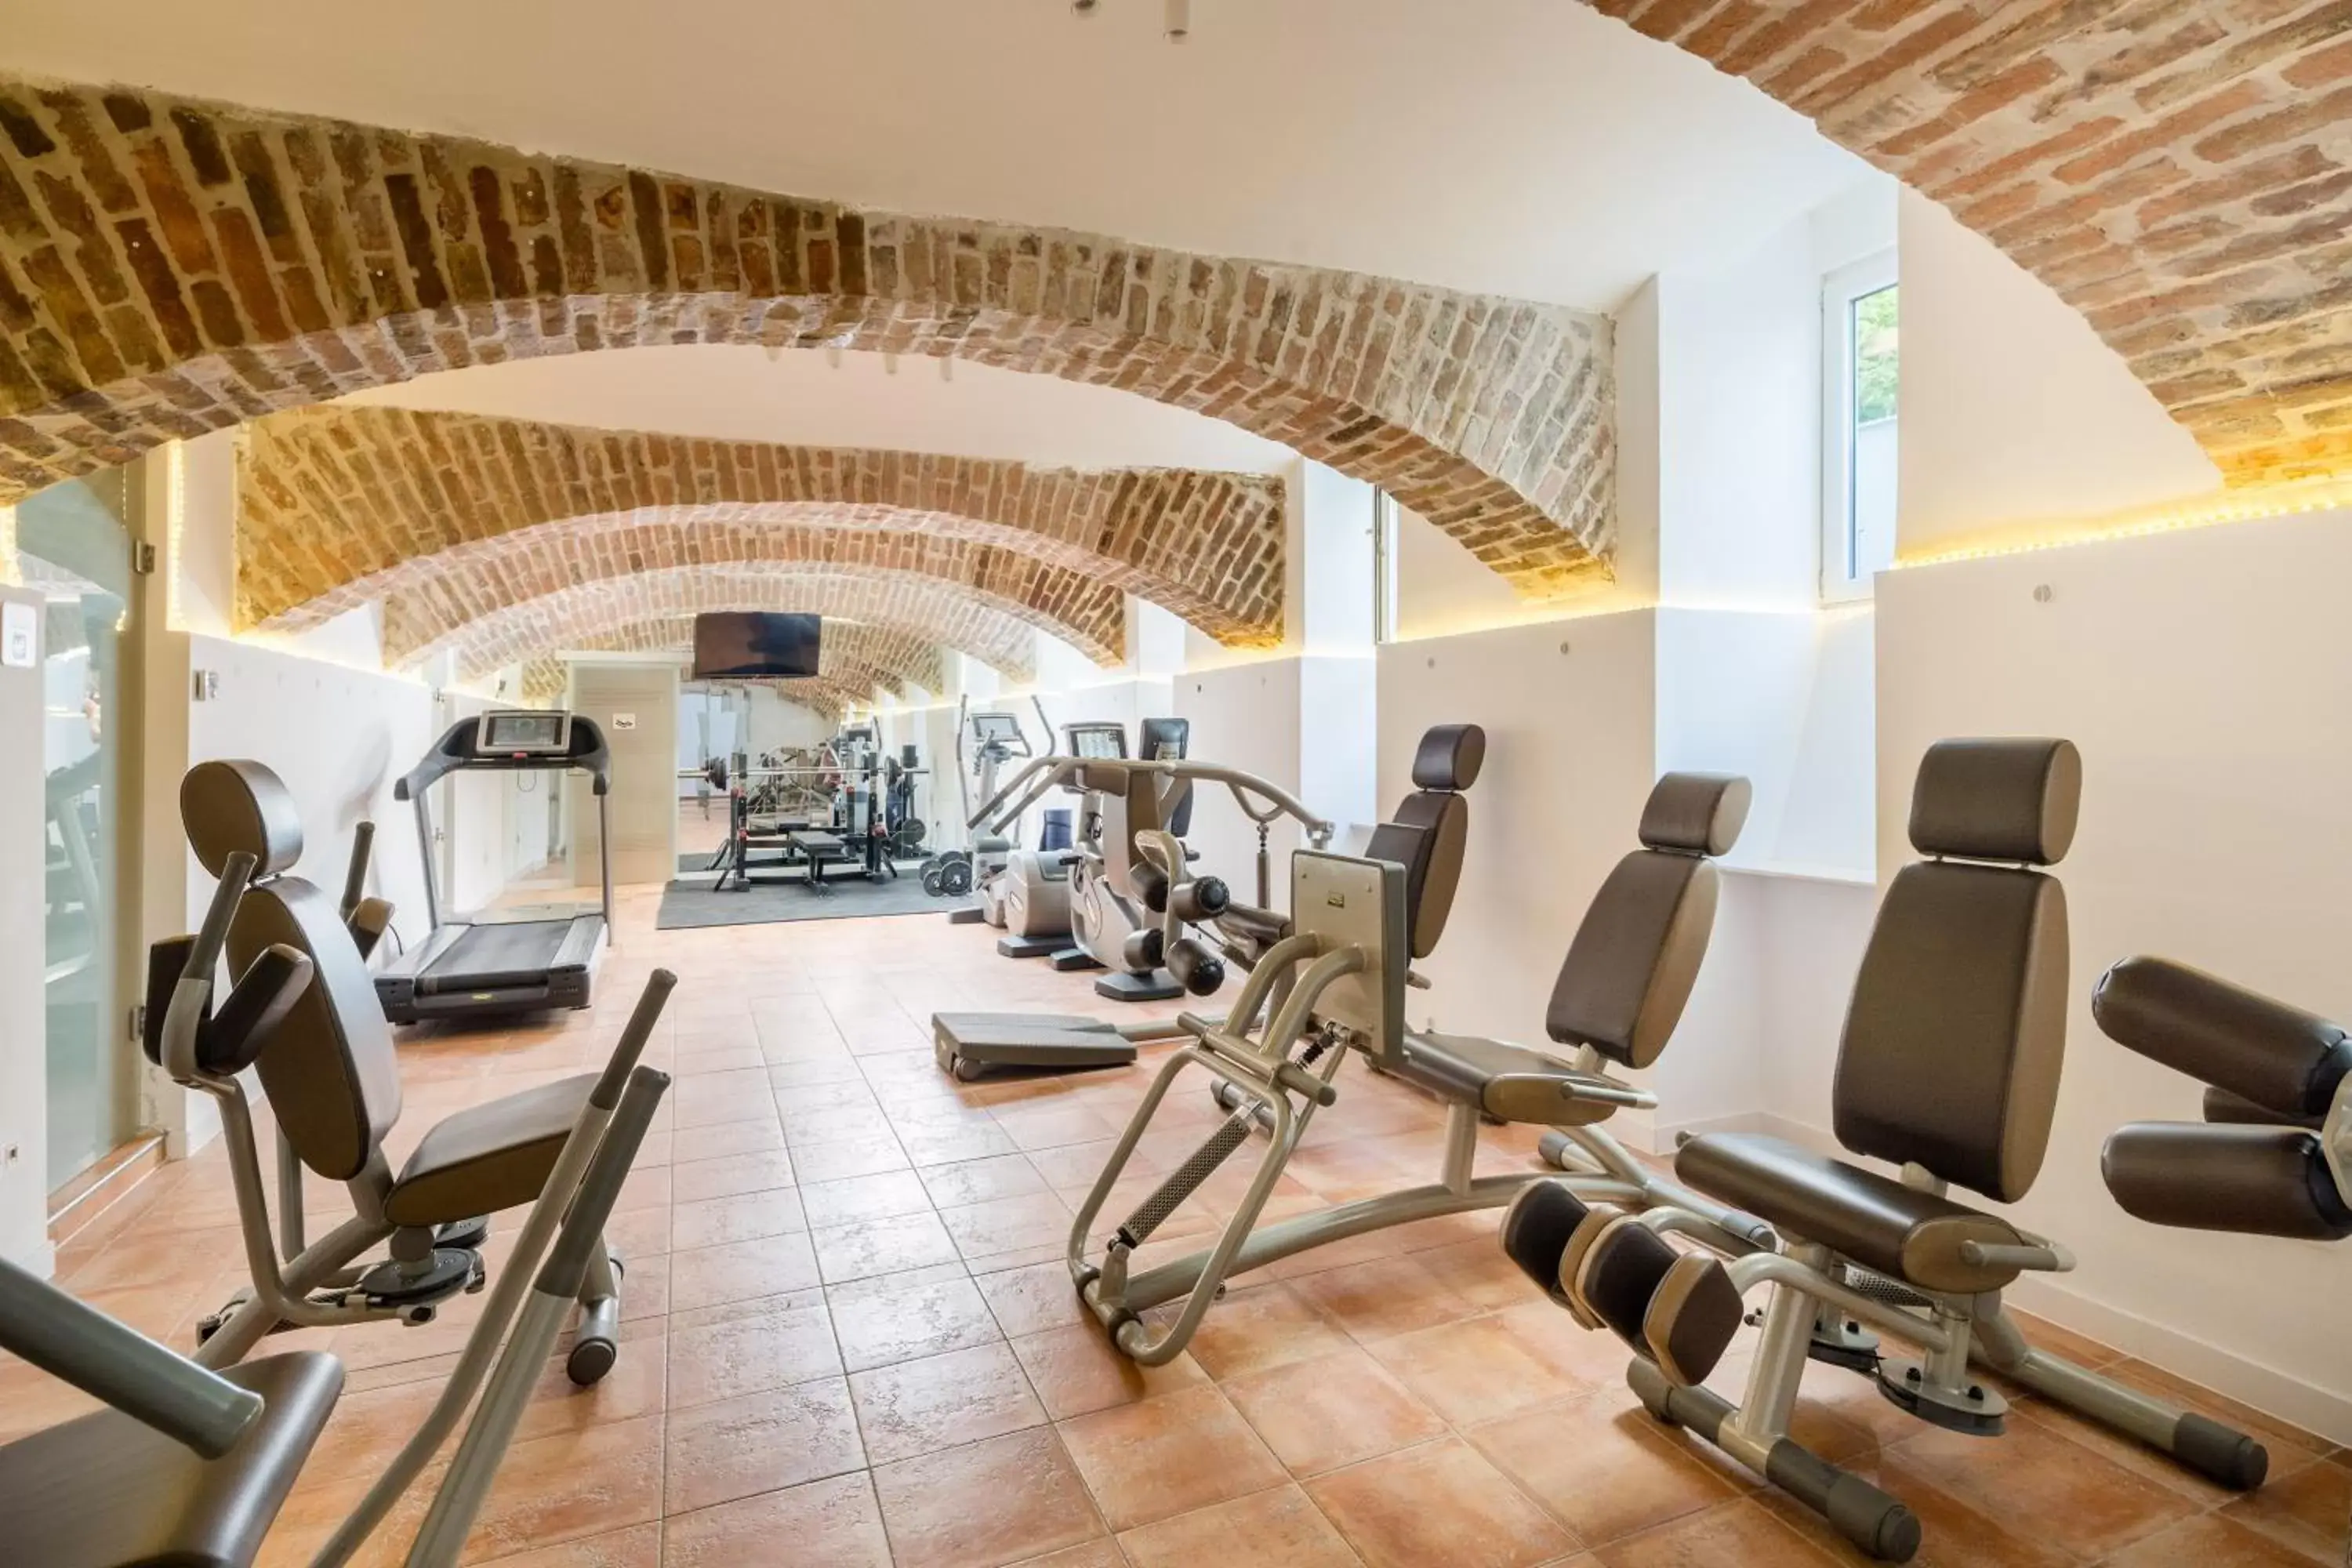 Fitness centre/facilities, Fitness Center/Facilities in Best Western Plus Celebrity Suites